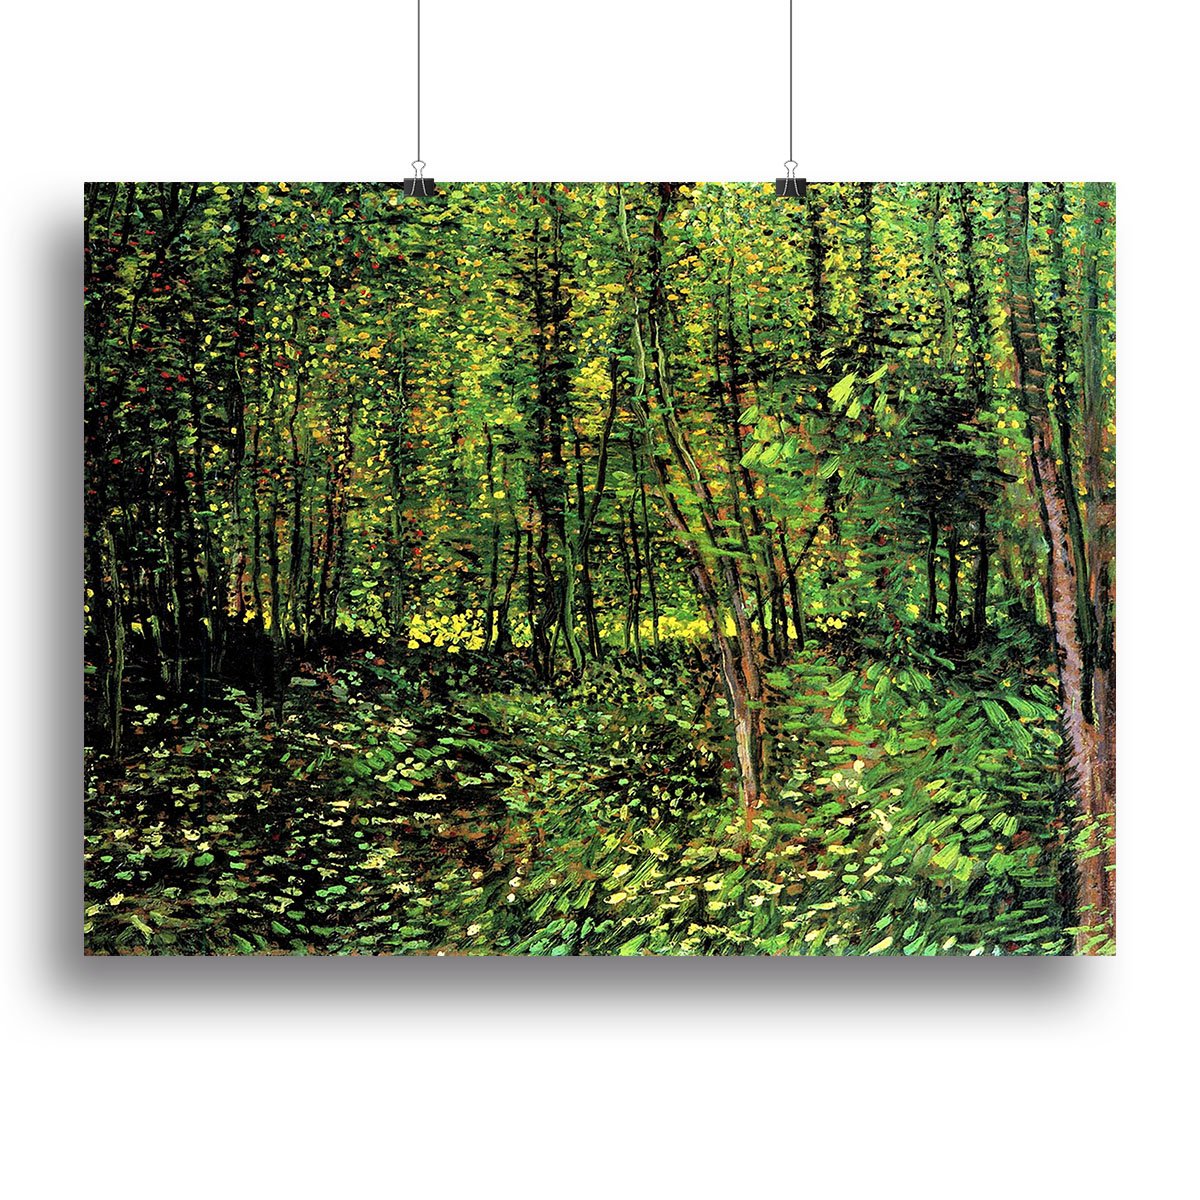 Trees and Undergrowth 2 by Van Gogh Canvas Print or Poster